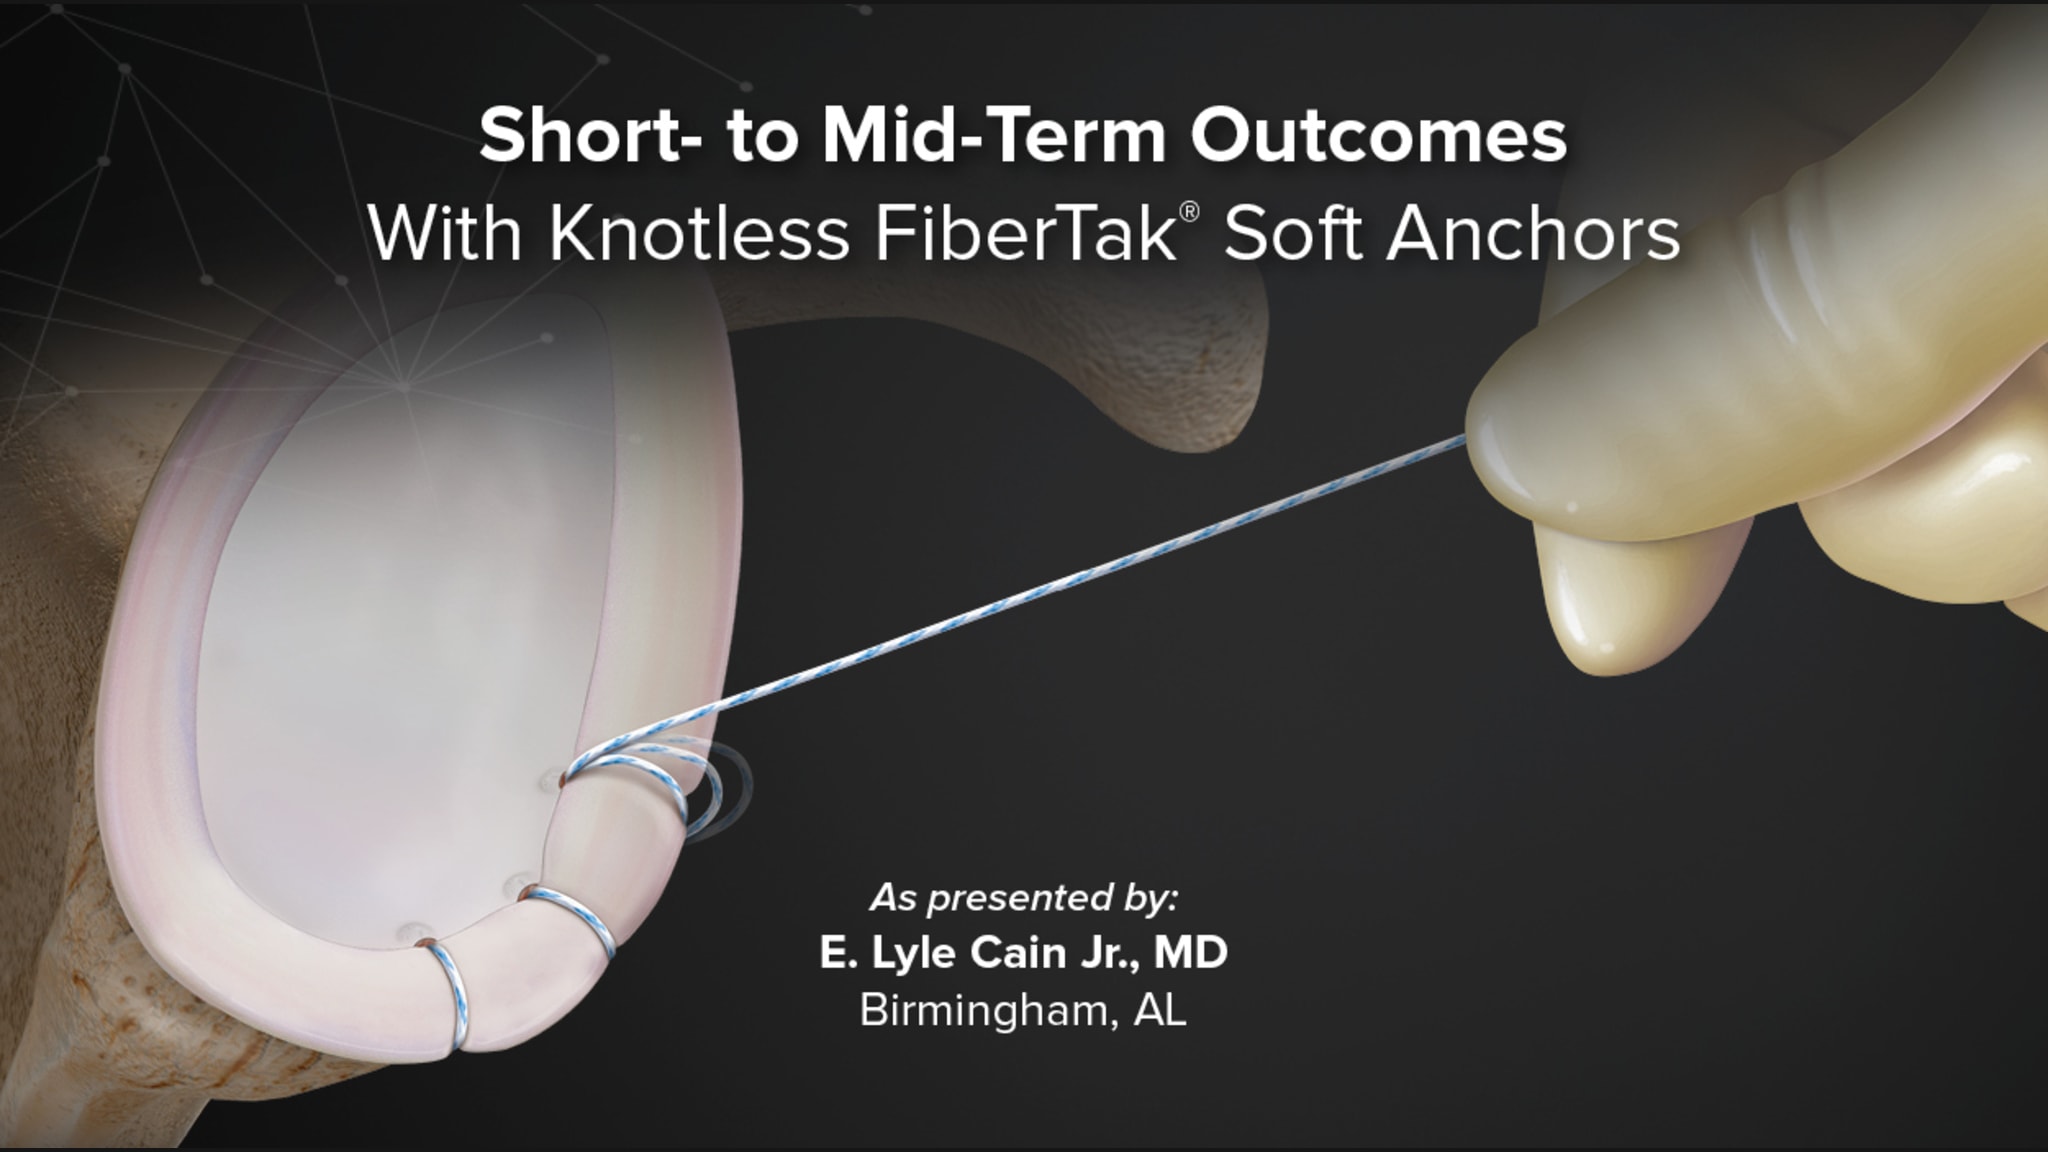 Short- to Mid-Term Outcomes With Knotless FiberTak® Soft Anchors